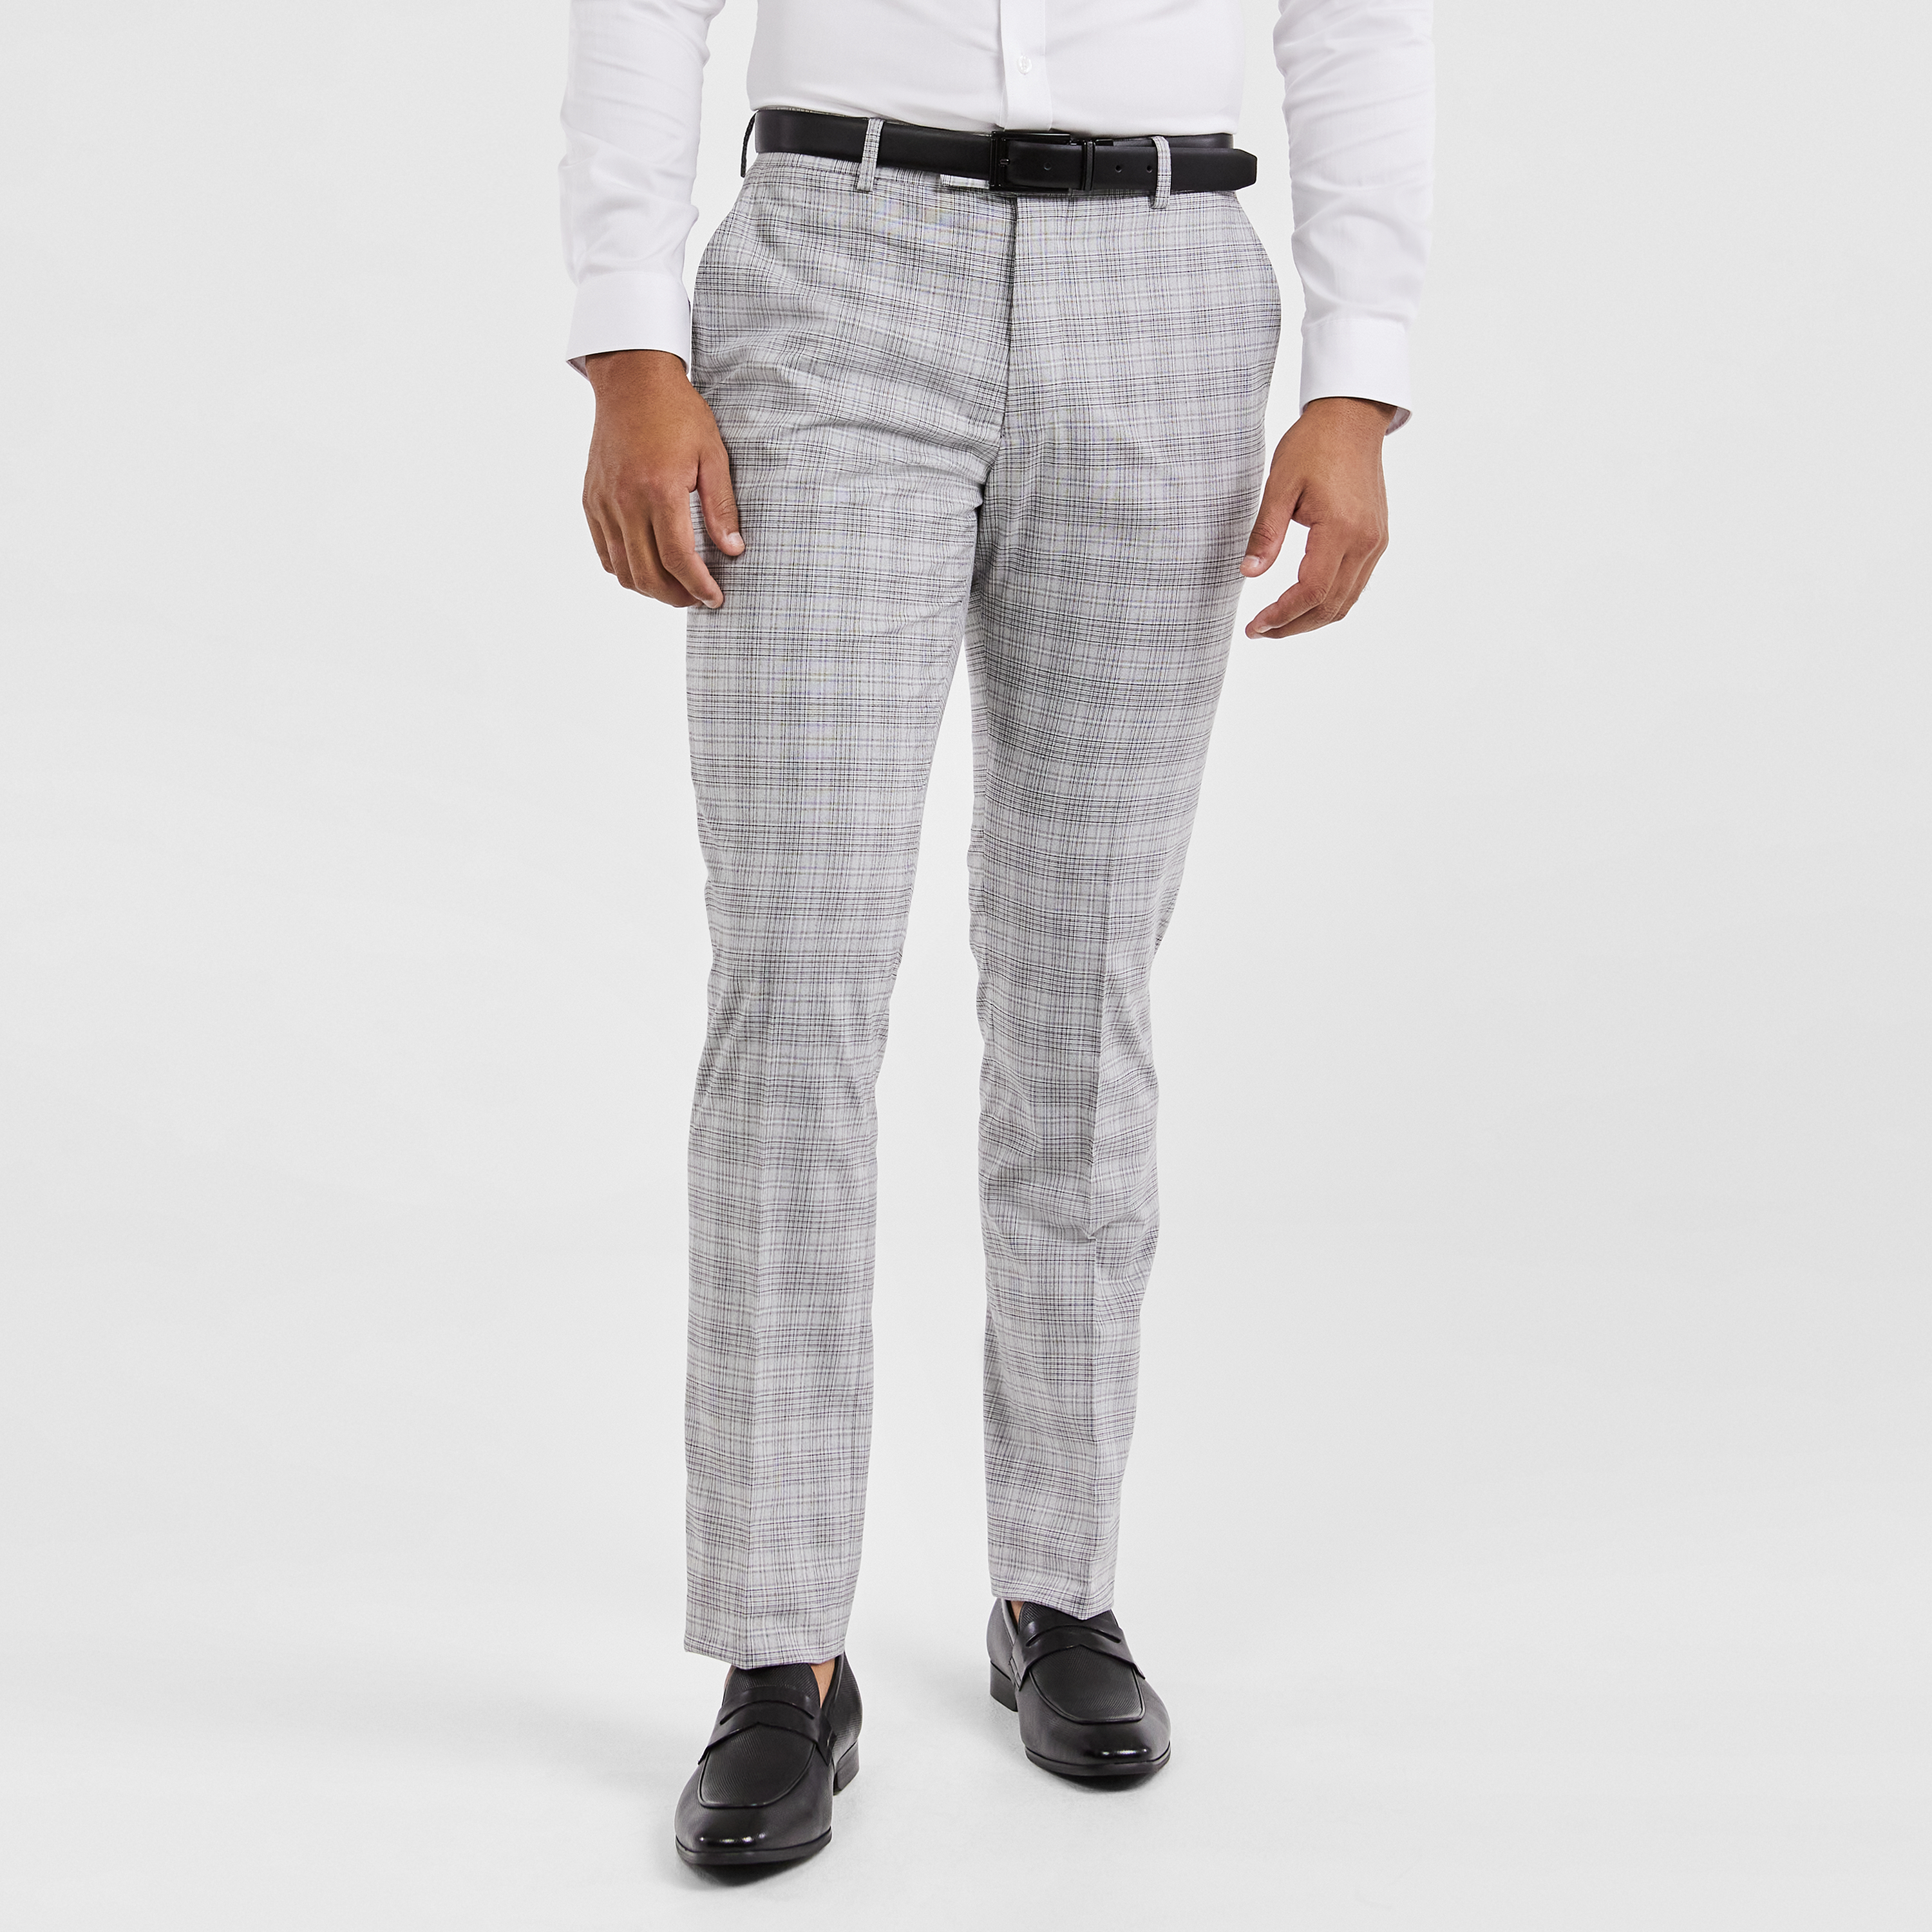 Beige checkered suit pants | Tailor Store®